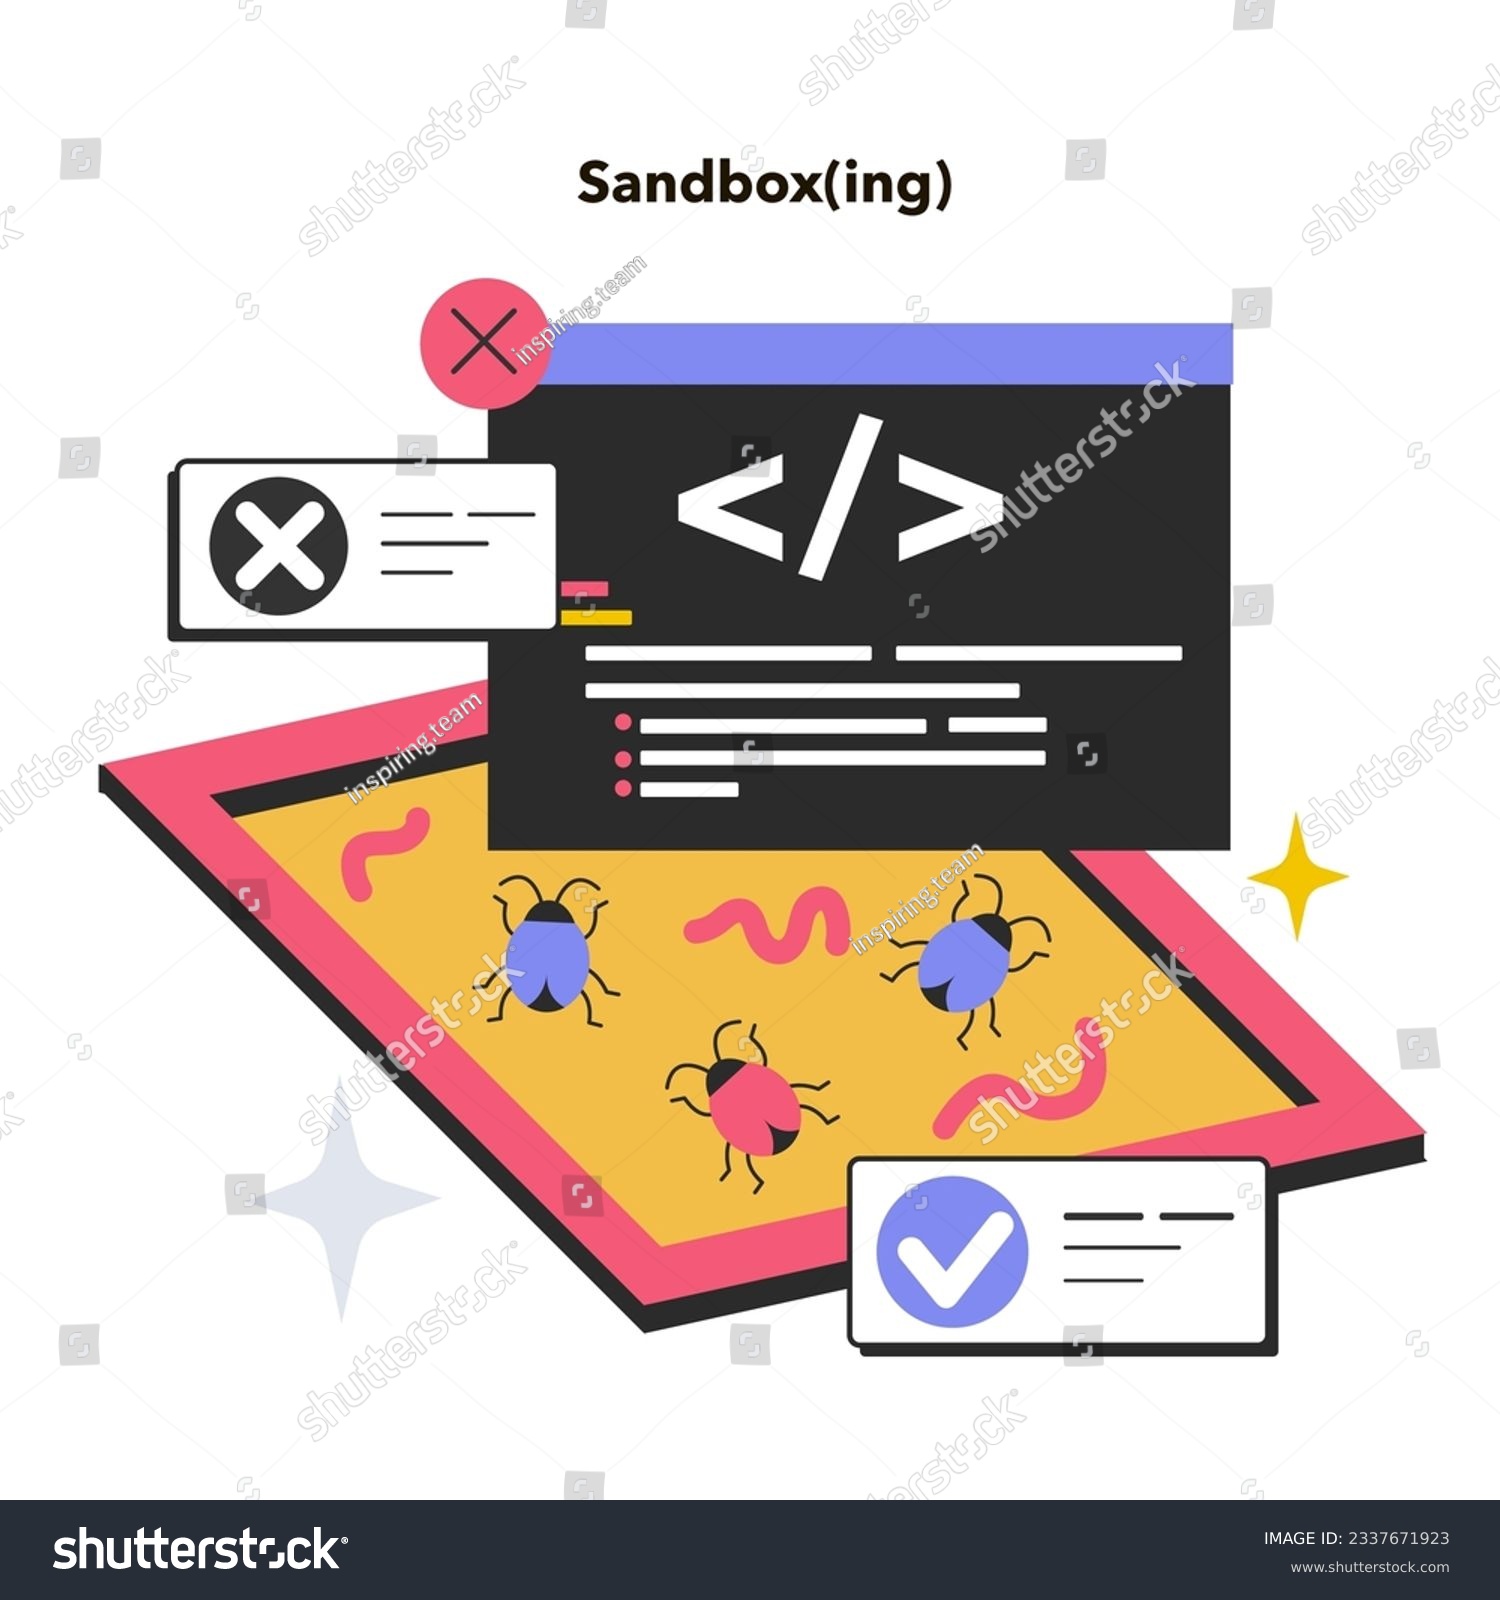 Sandboxing. Security mechanism for isolation and separation of running programs. System failures and software vulnerabilities detection. Flat vector illustration #2337671923